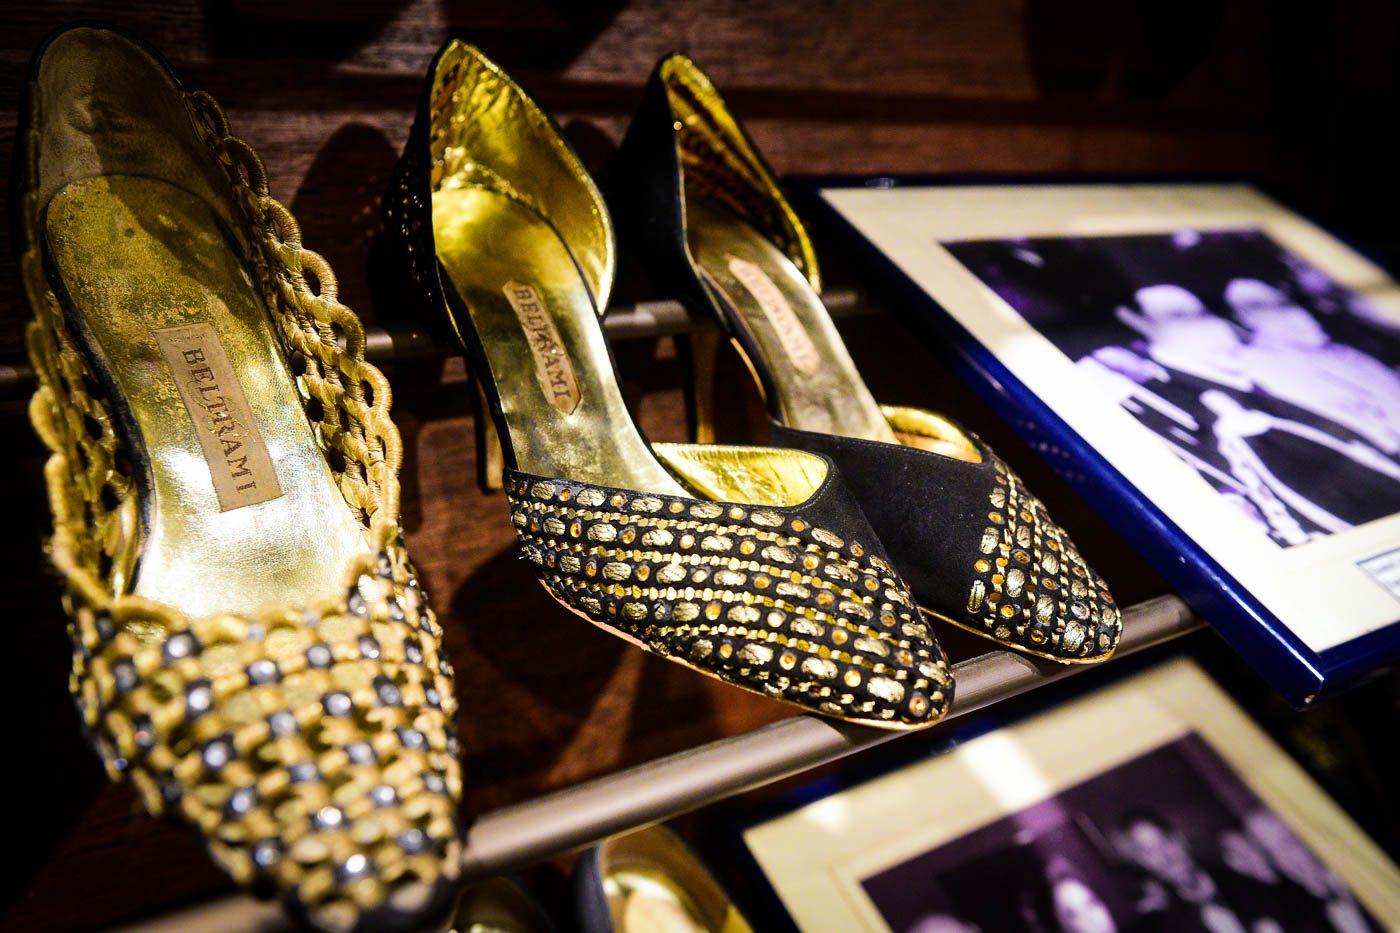 3,000 pairs: The mixed legacy of Imelda Marcos’ shoes